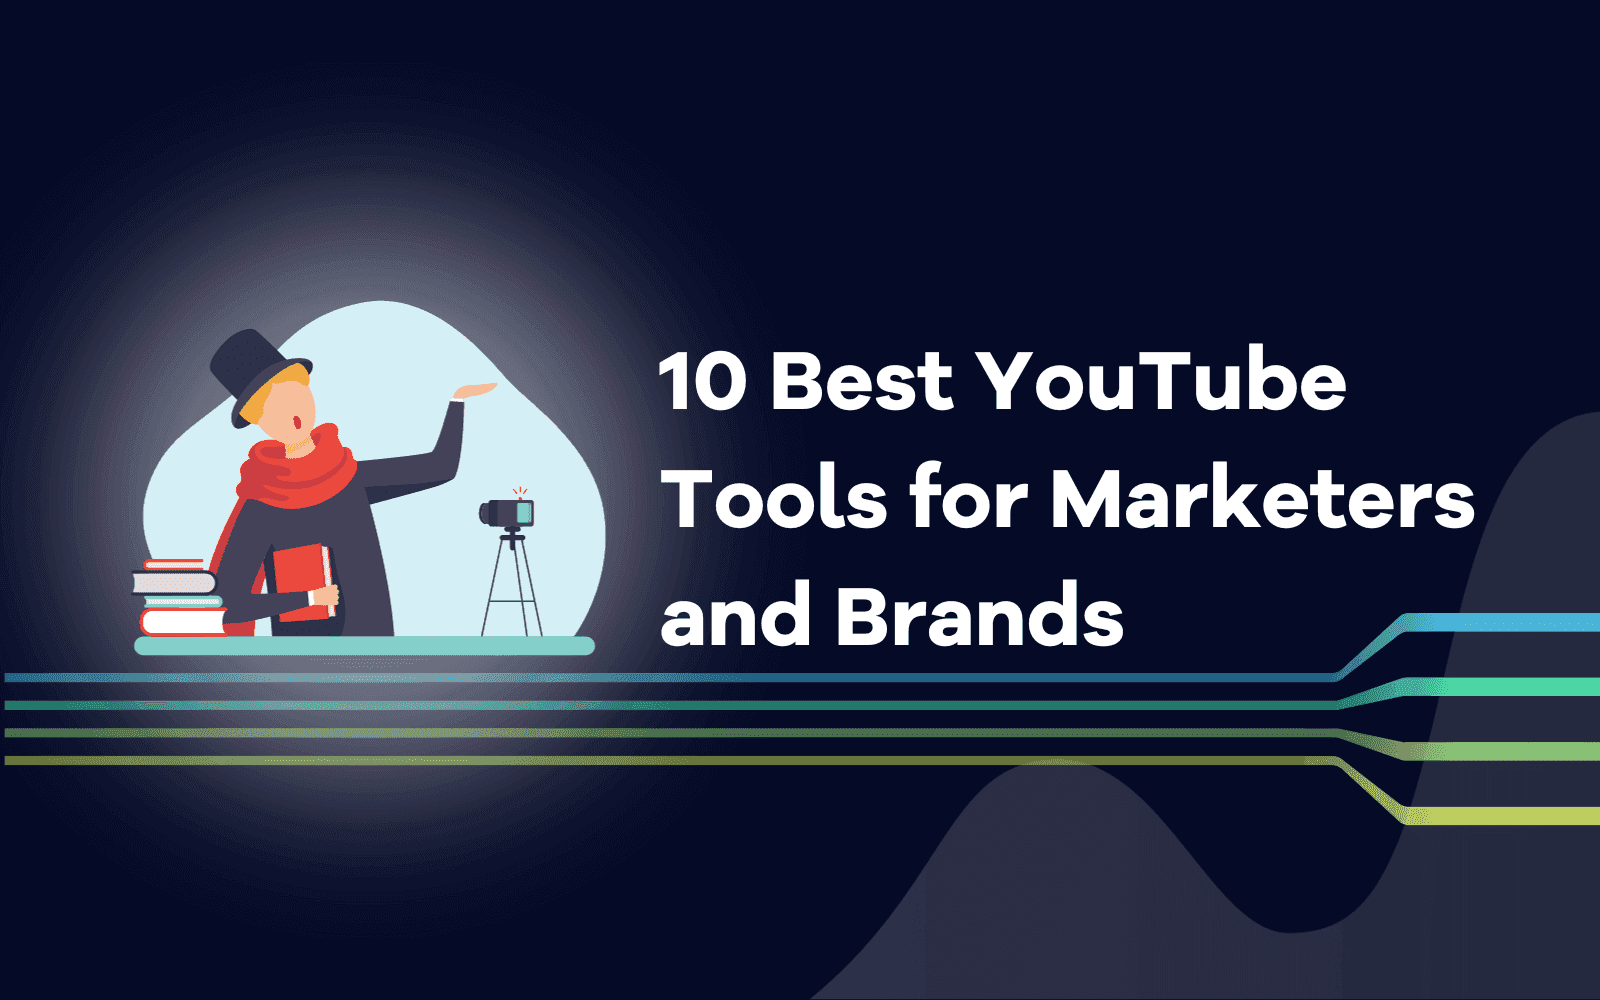 Best YouTube Tools for Marketers and Brands